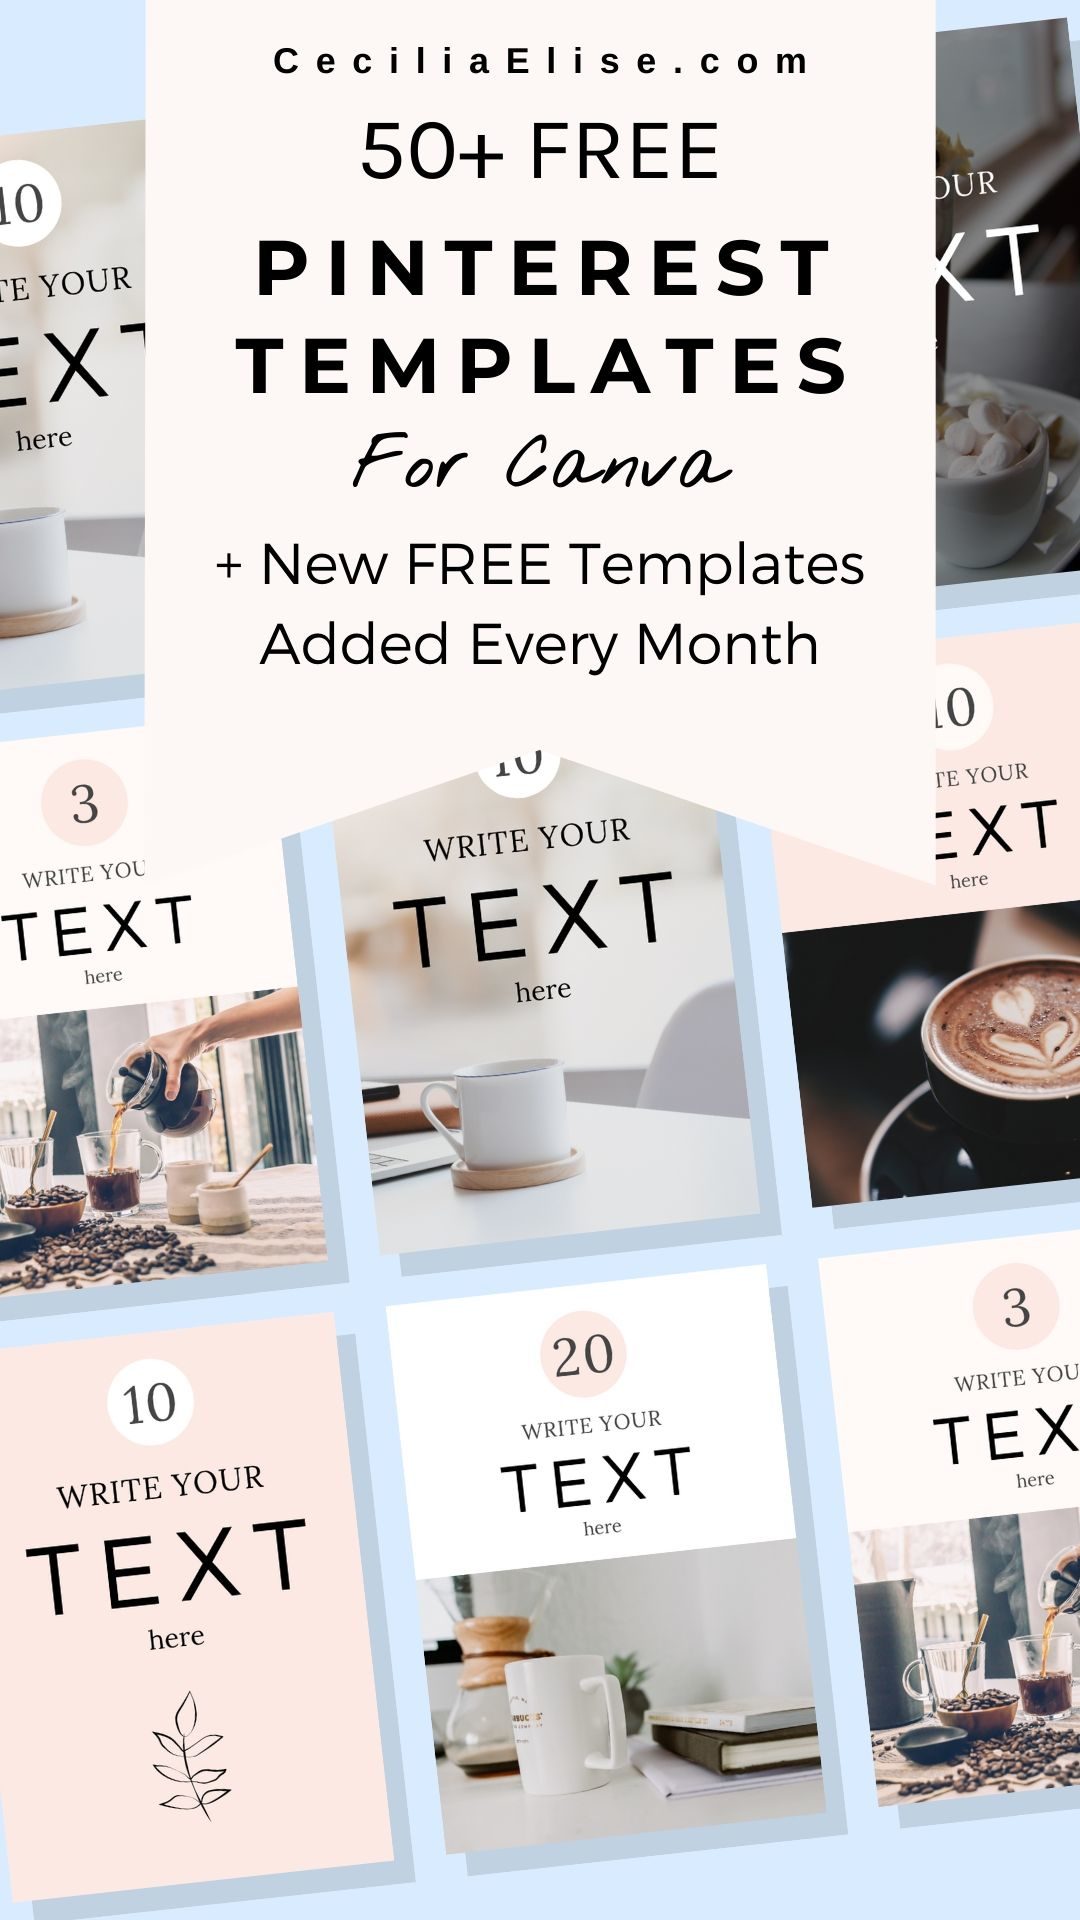 Free Pinterest templates for Canva